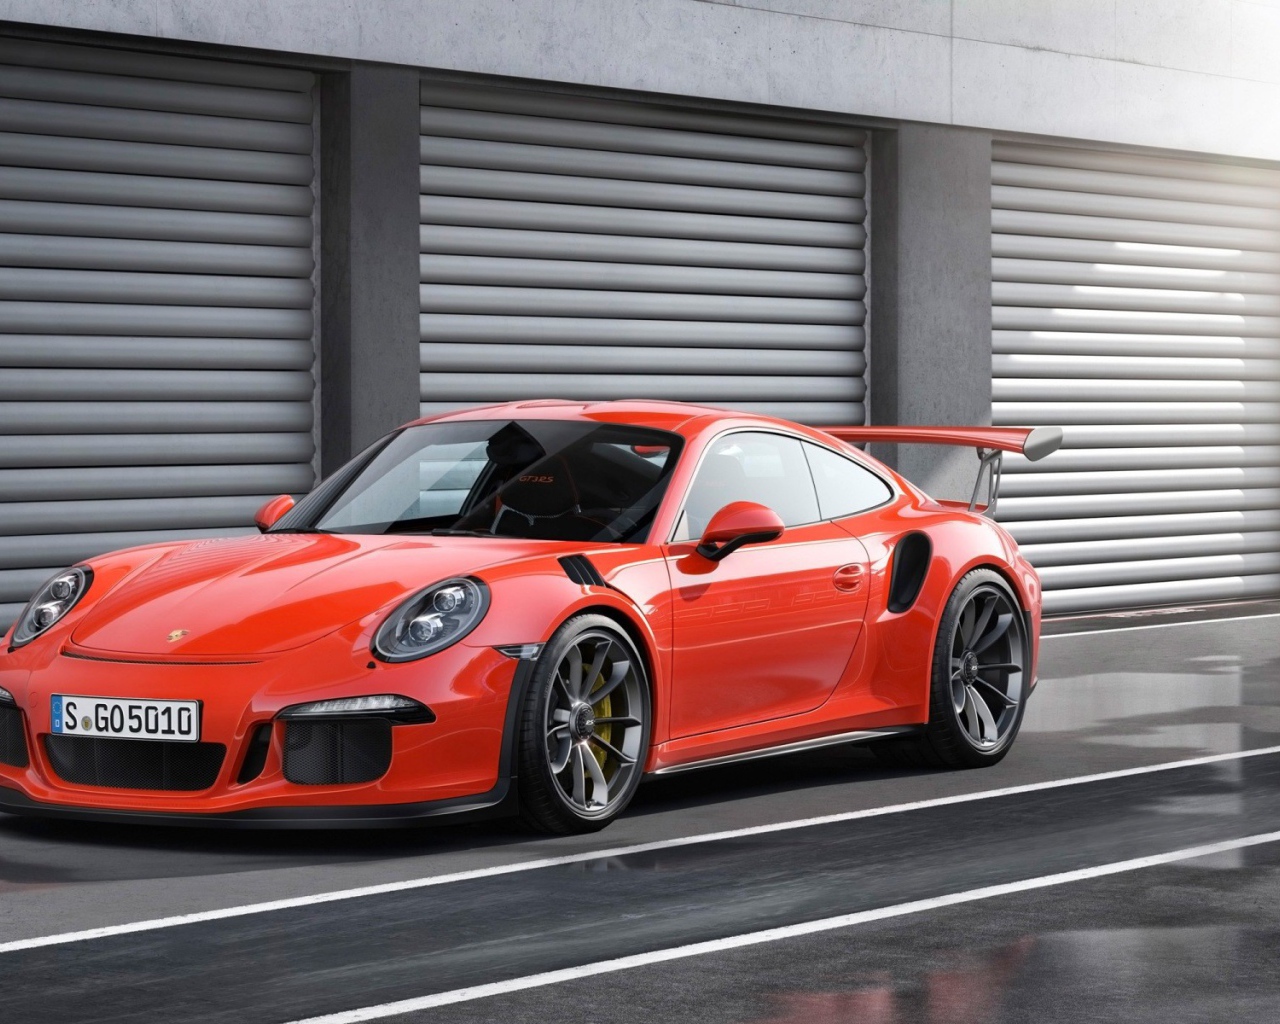 Red Porsche 911 GT3 RS at the gate of garages